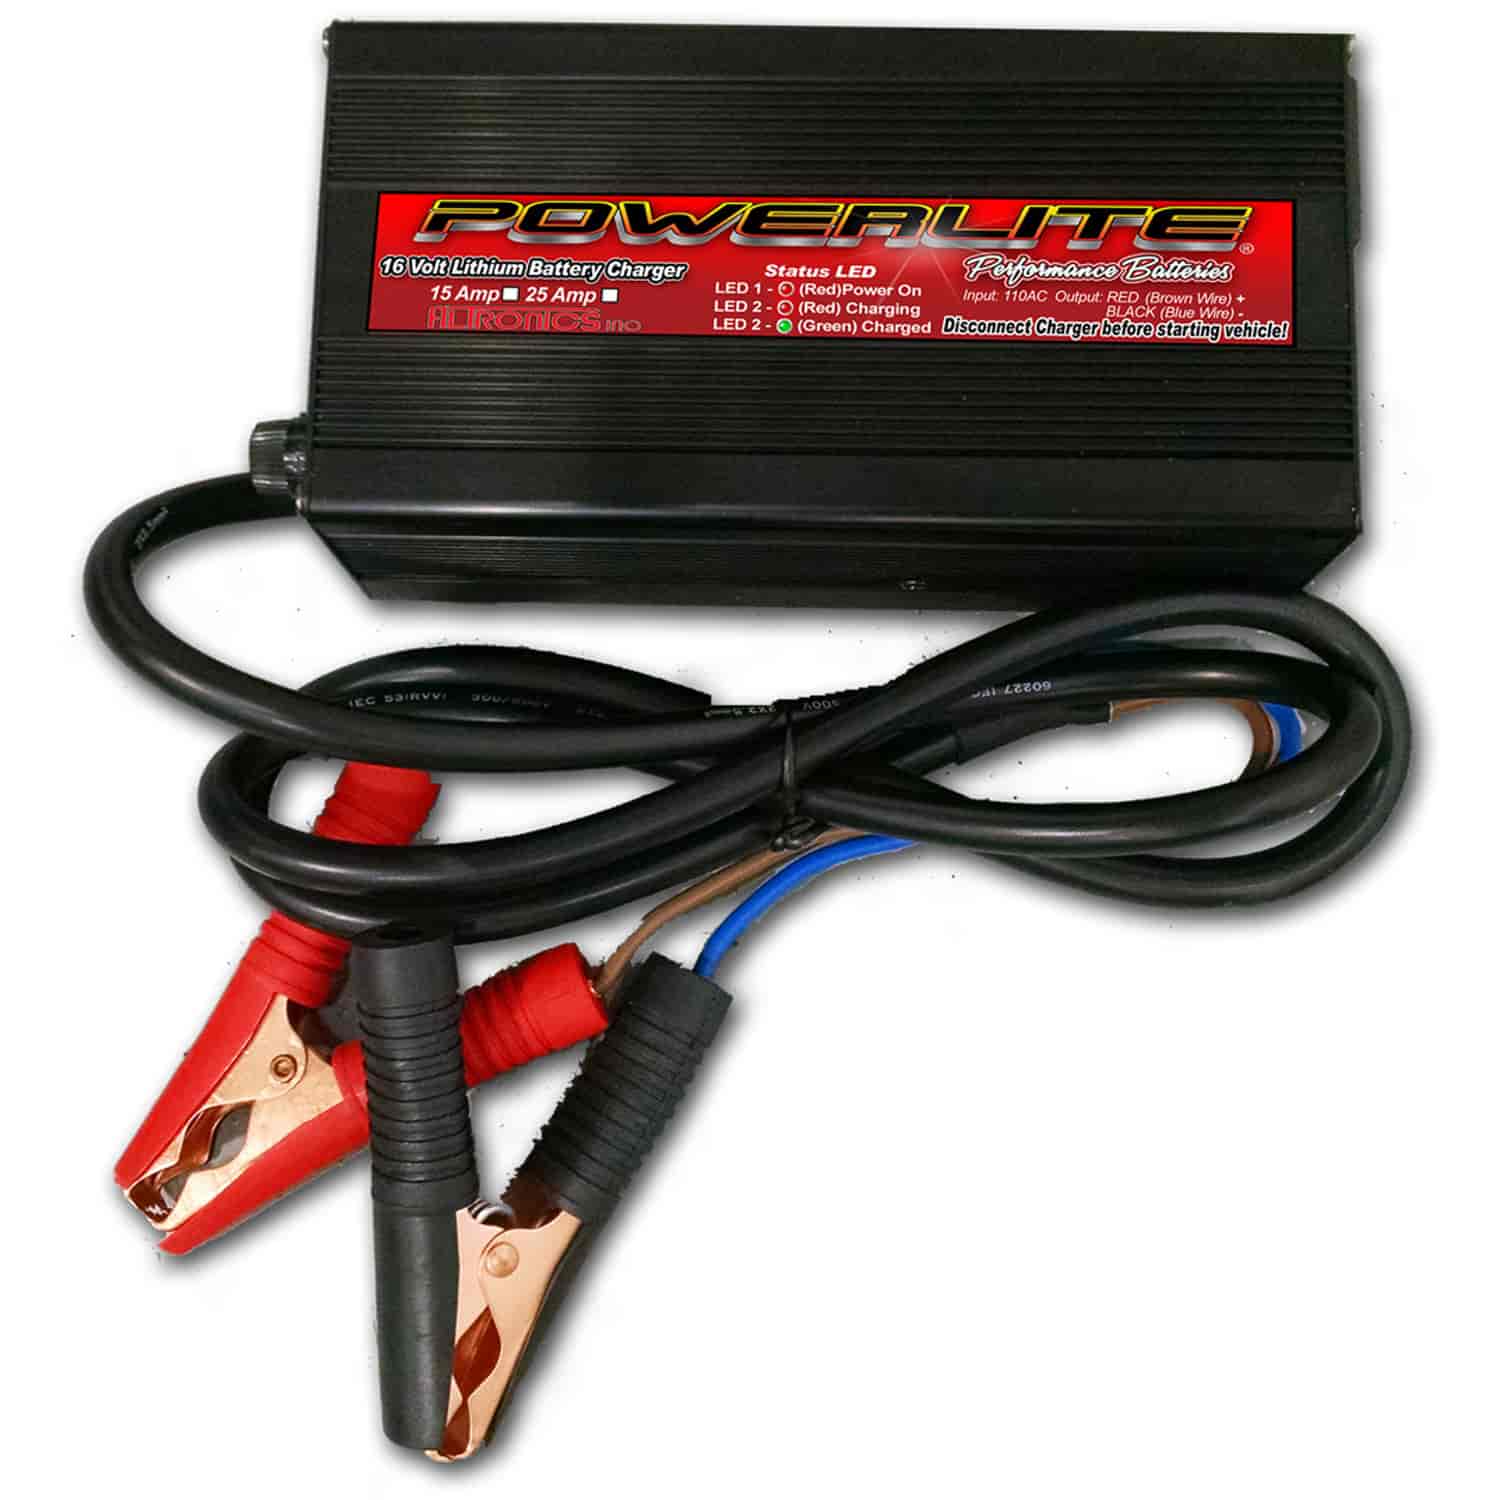 Powerlite Lithium Battery Charger